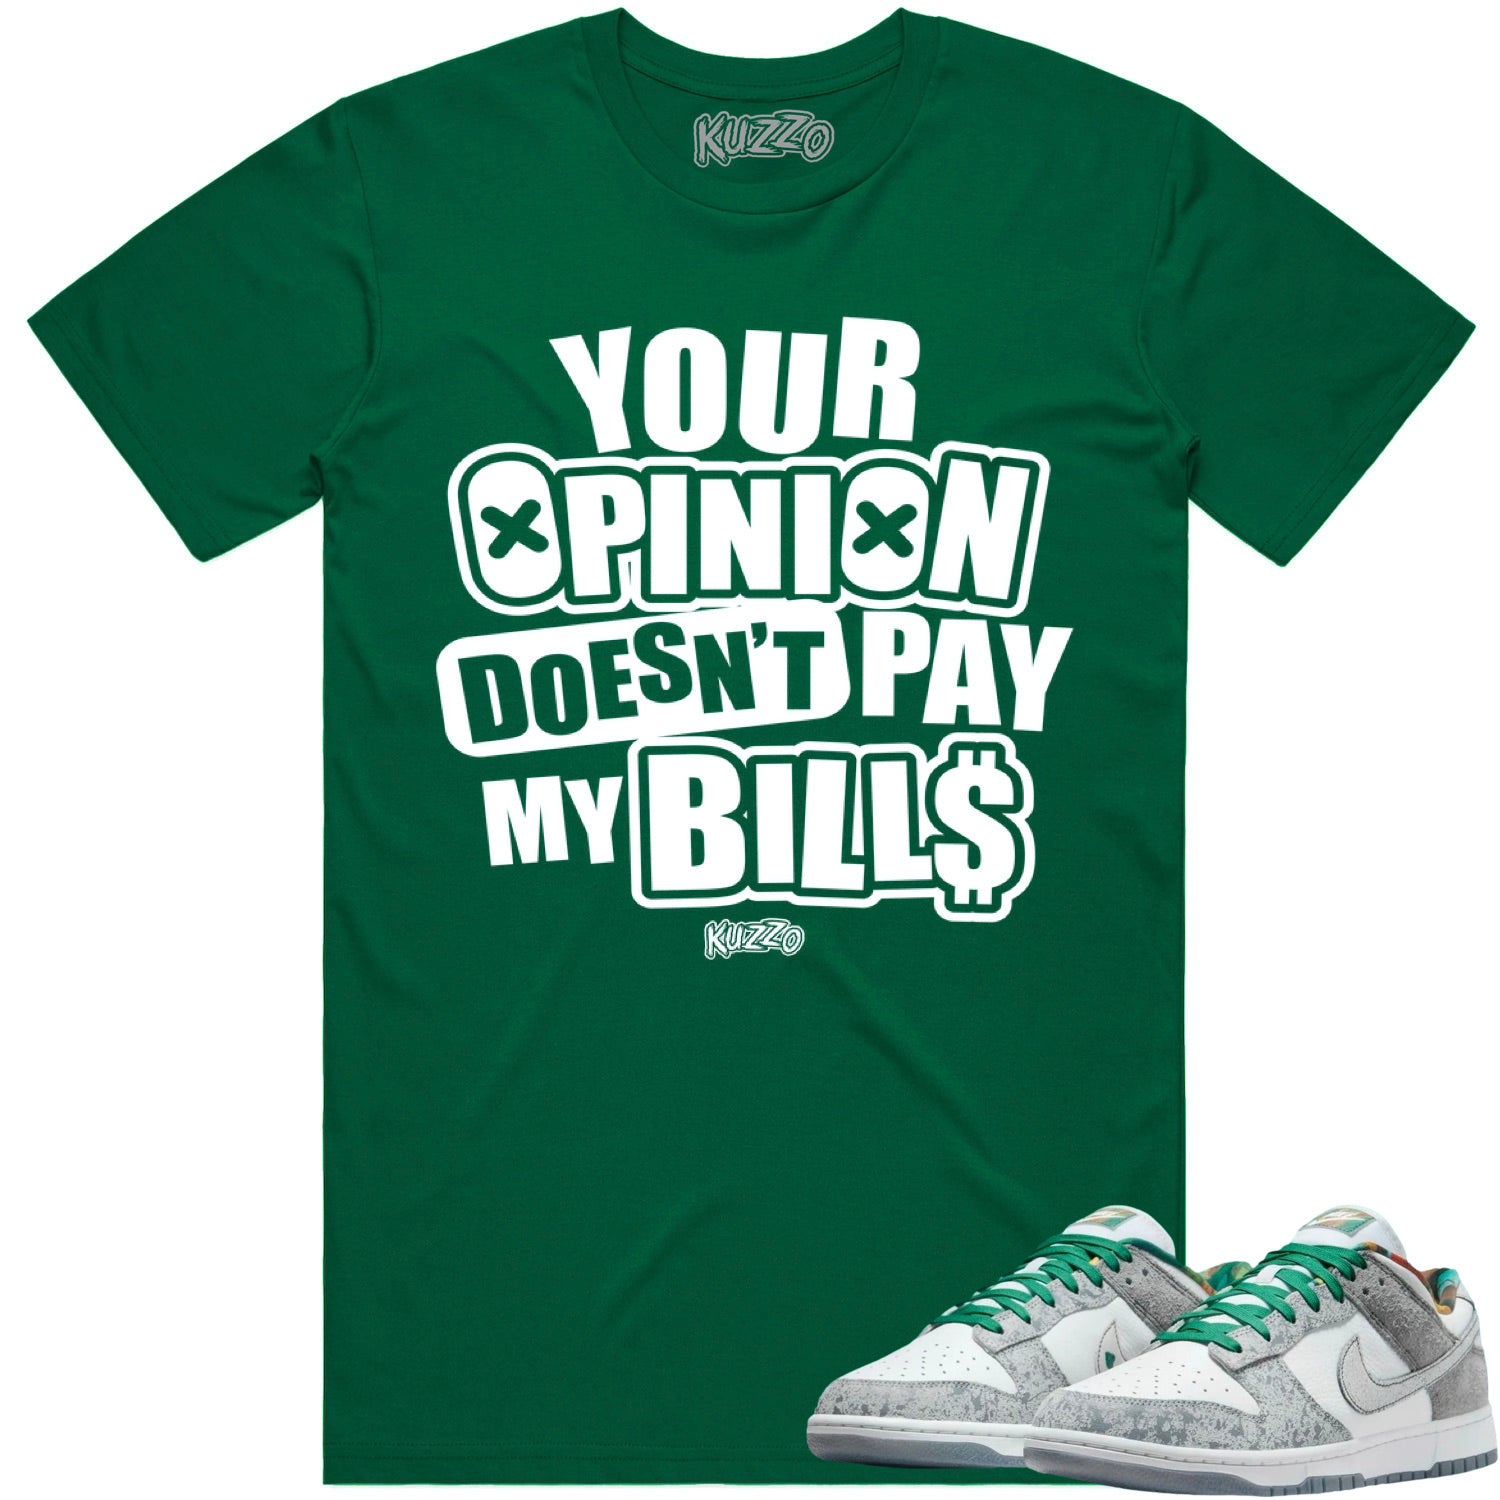 Philly Dunks Shirt to Match - OPINION